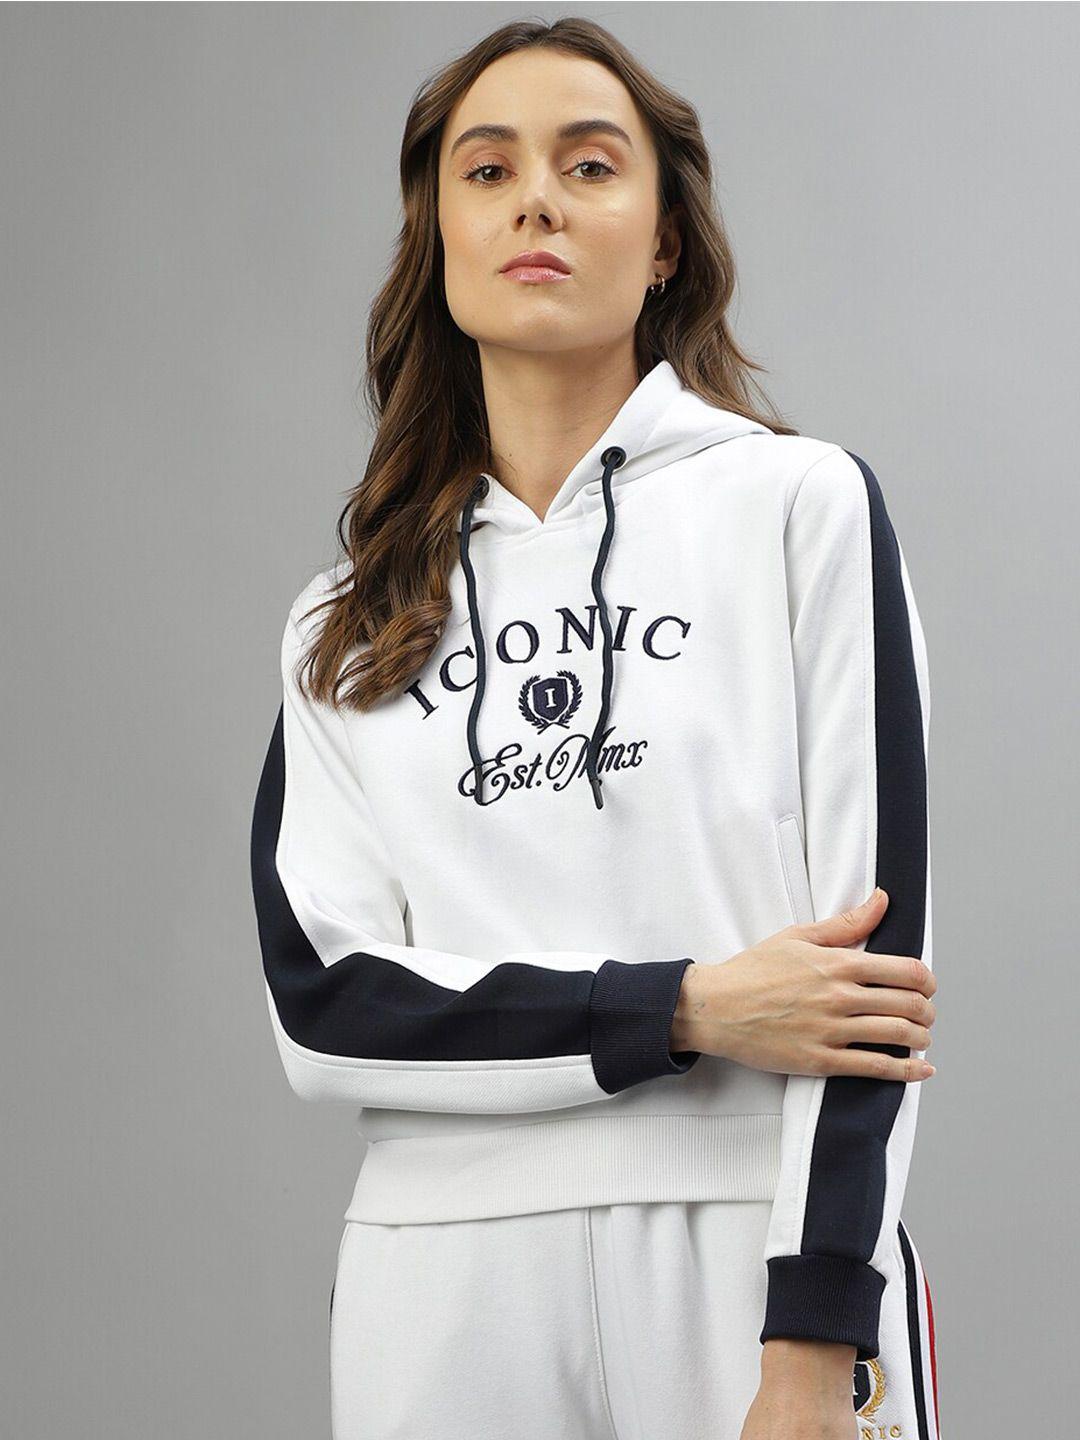 iconic typography printed hooded pullover sweatshirt